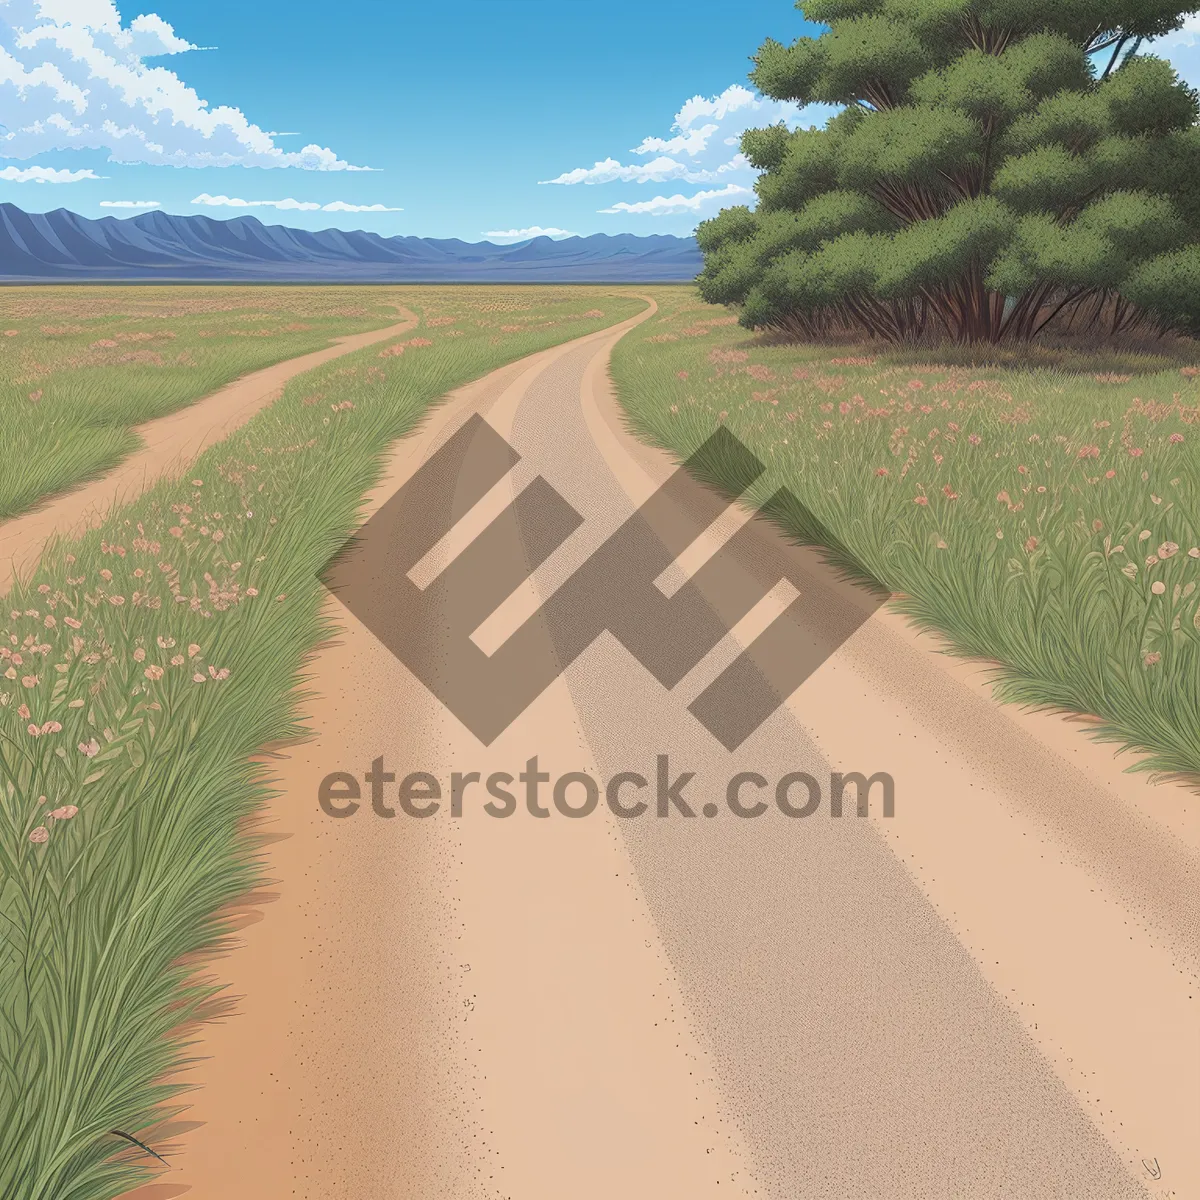 Picture of Golden Wheat Pathway in Rural Landscape